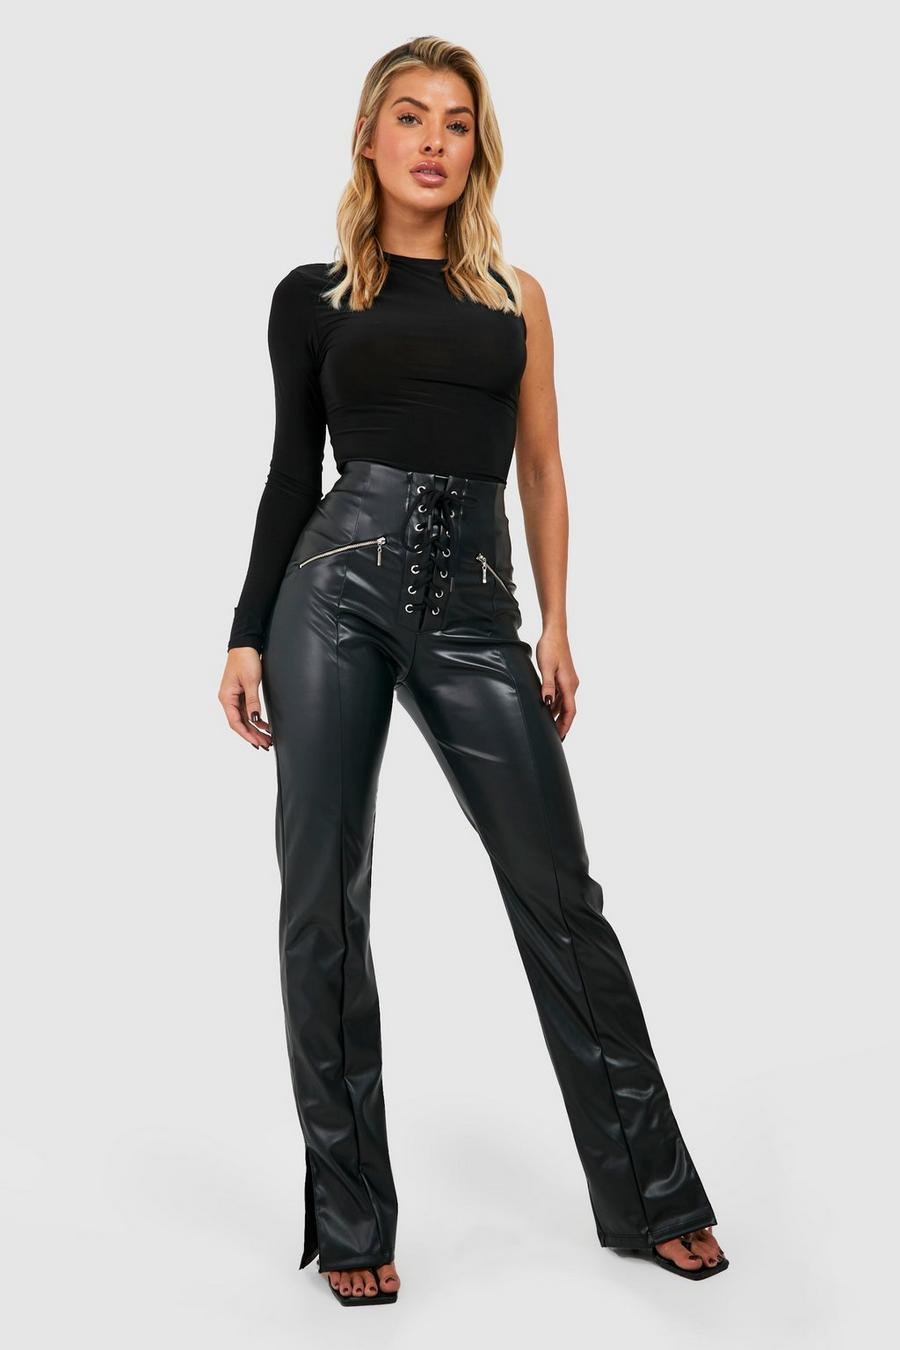 Black Leather Pants for Women, Black PU Leather Pants for Women, Leather  Flared Pants for Women, Artificial Leather Pants for Women -  Canada